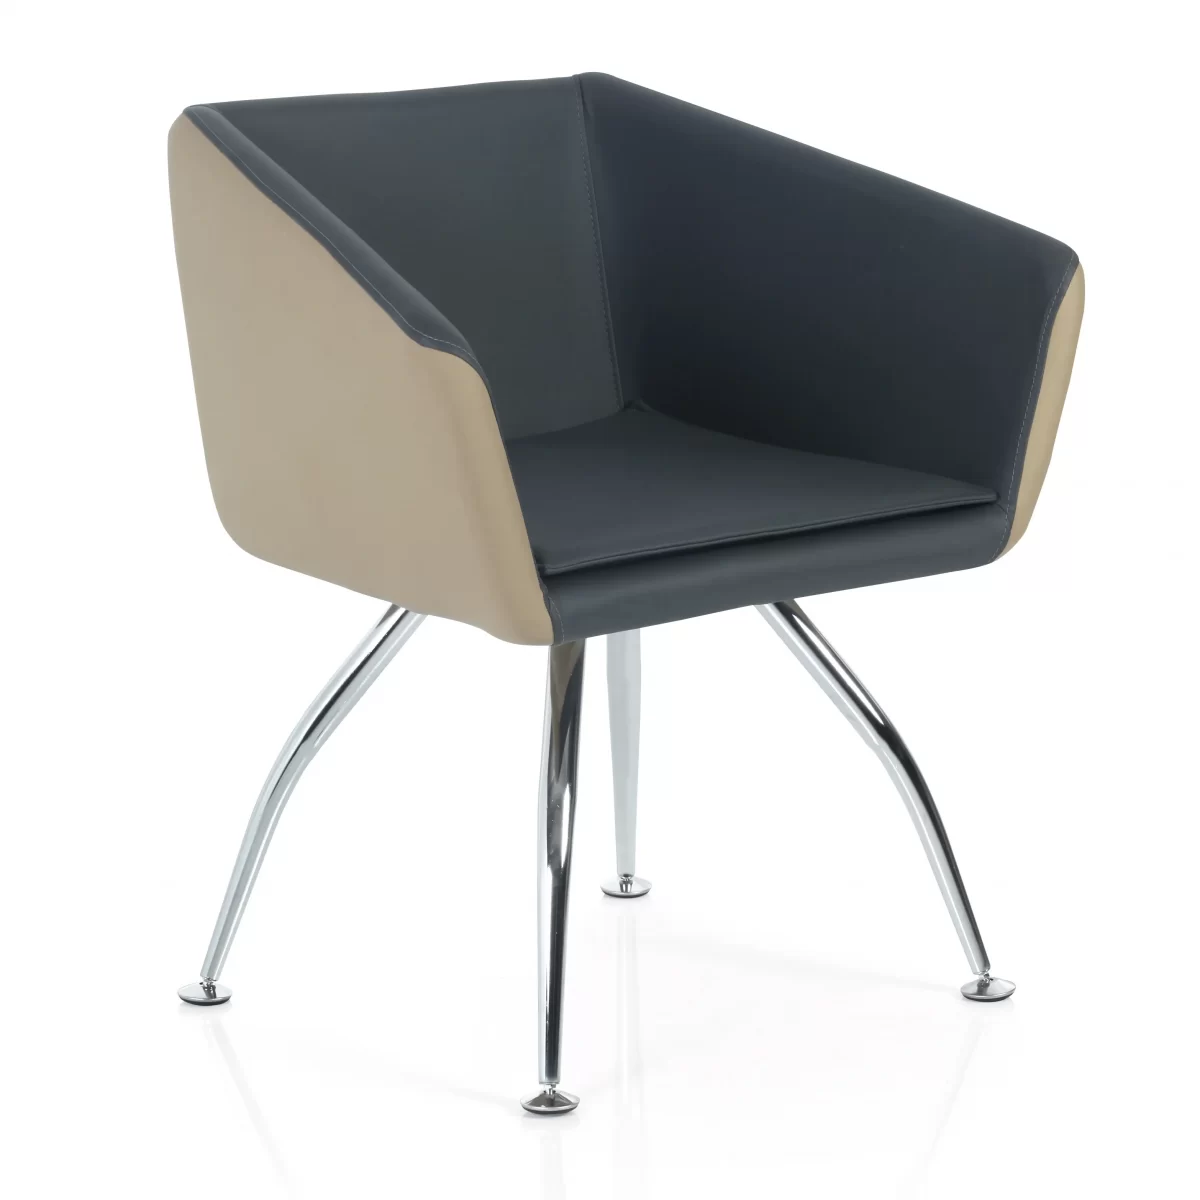 Nantes Office Cafe Chair scaled